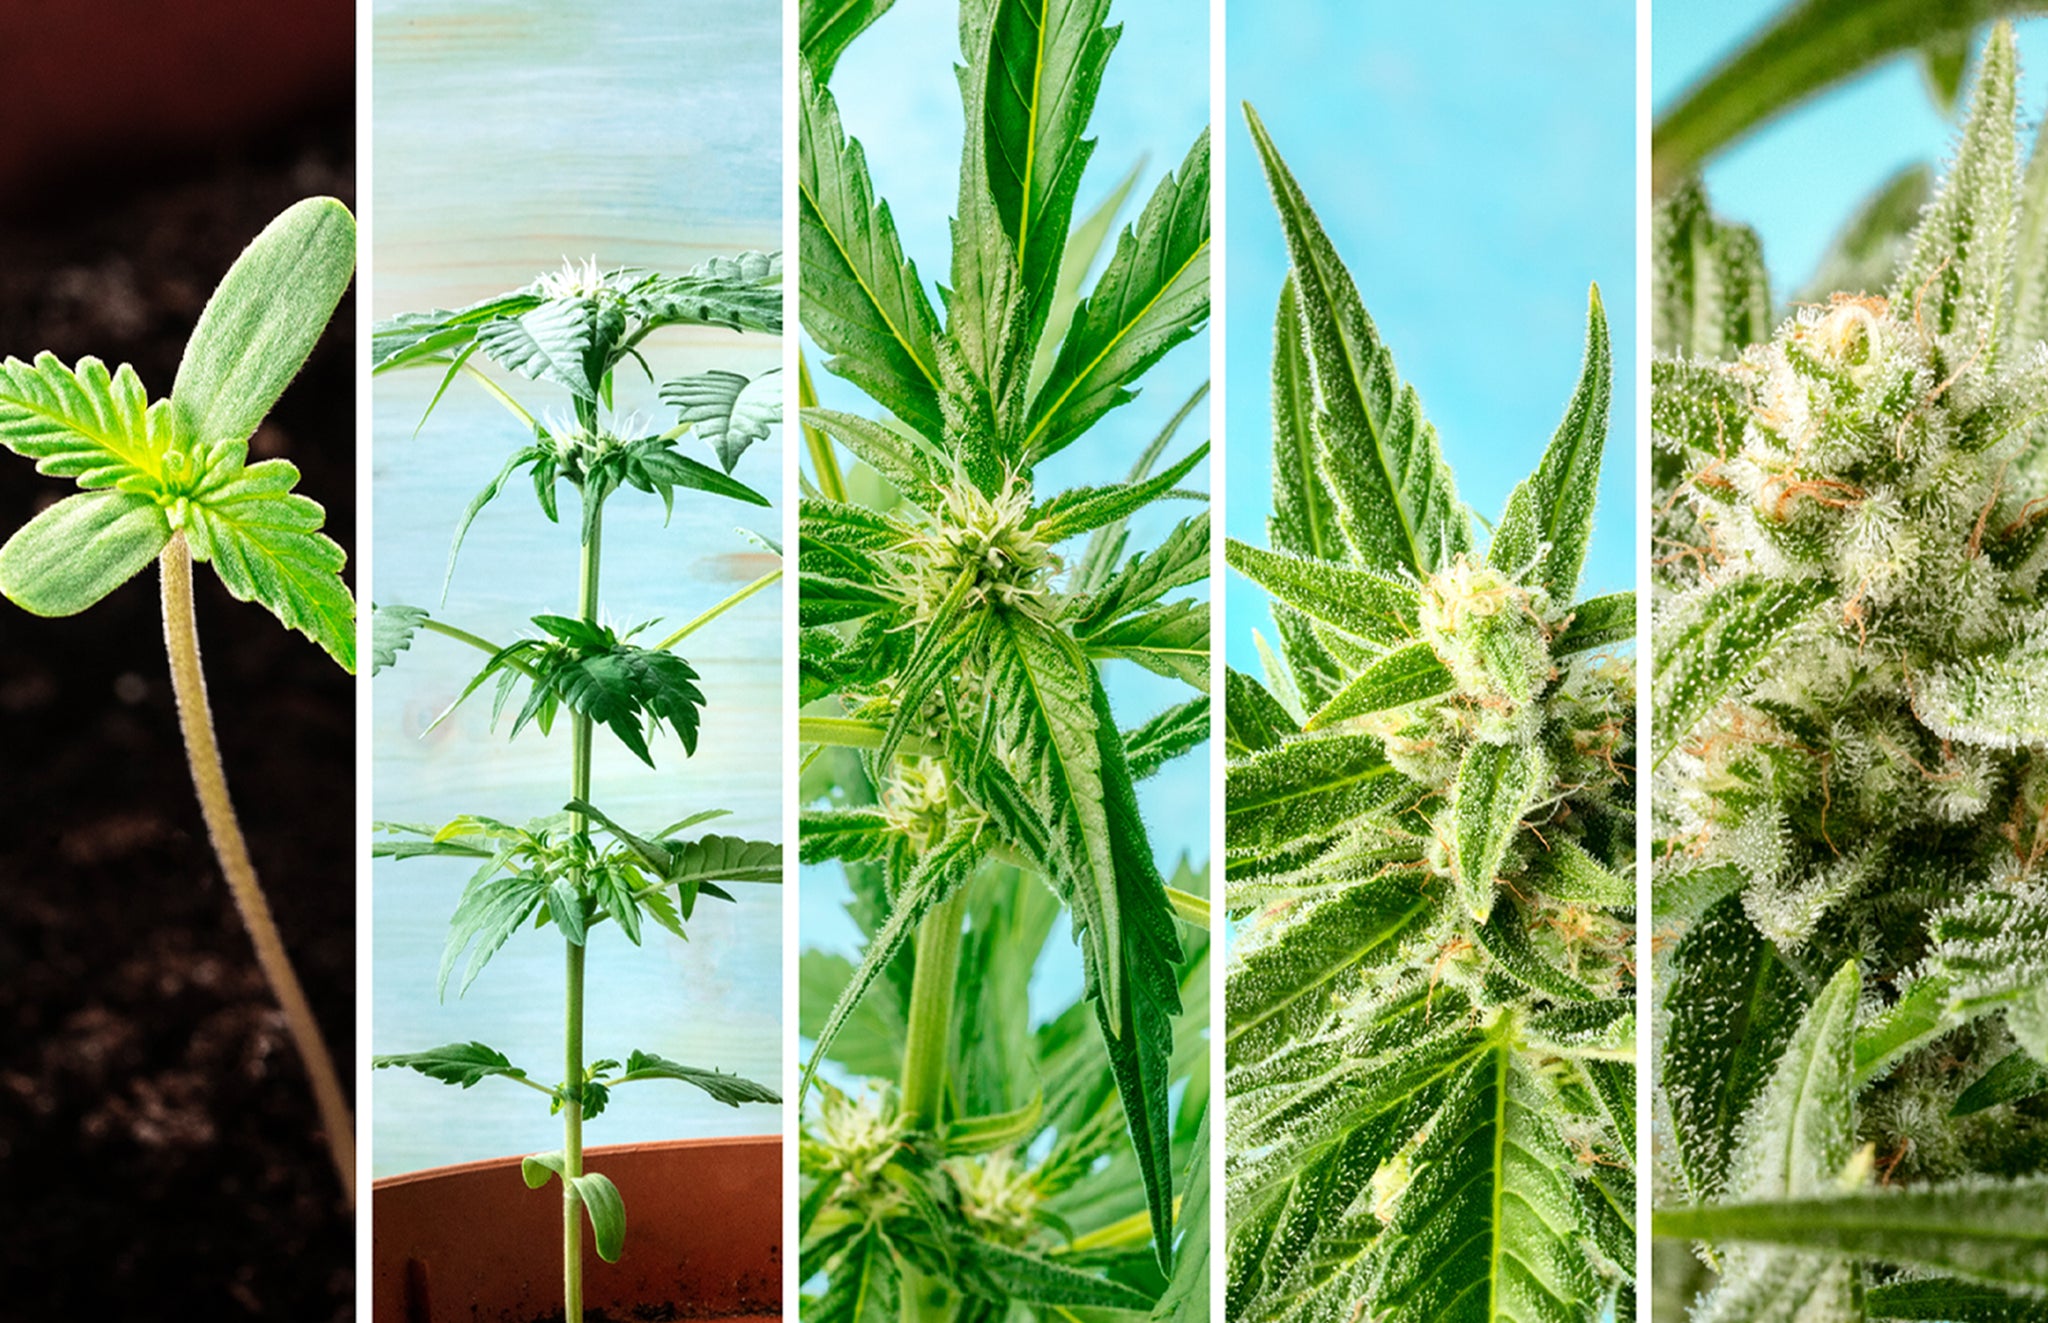 Growing Stages of Cannabis: The Marijuana Plant Life Cycle